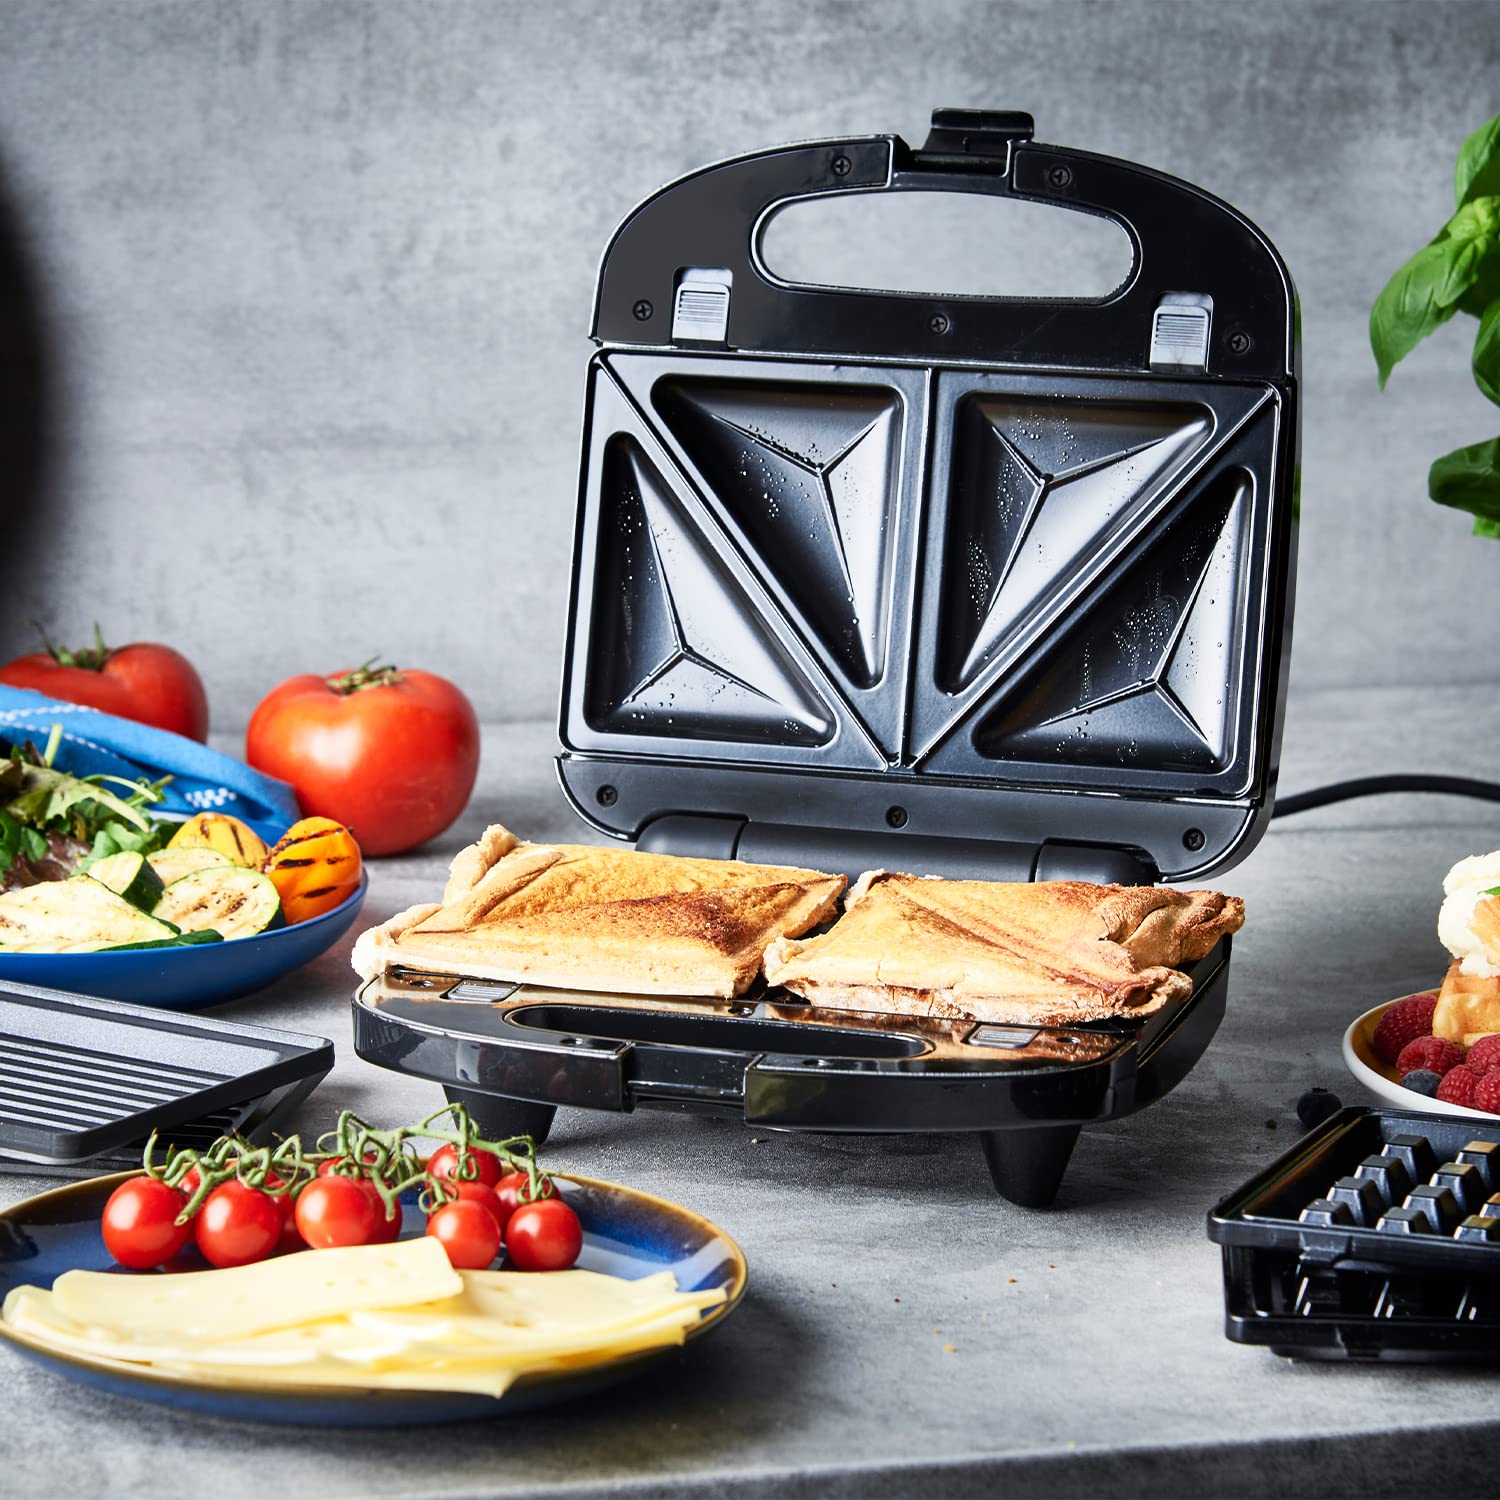 Russell Hobbs 3-In-1 Sandwich/Panini And Waffle Maker Black, 24540